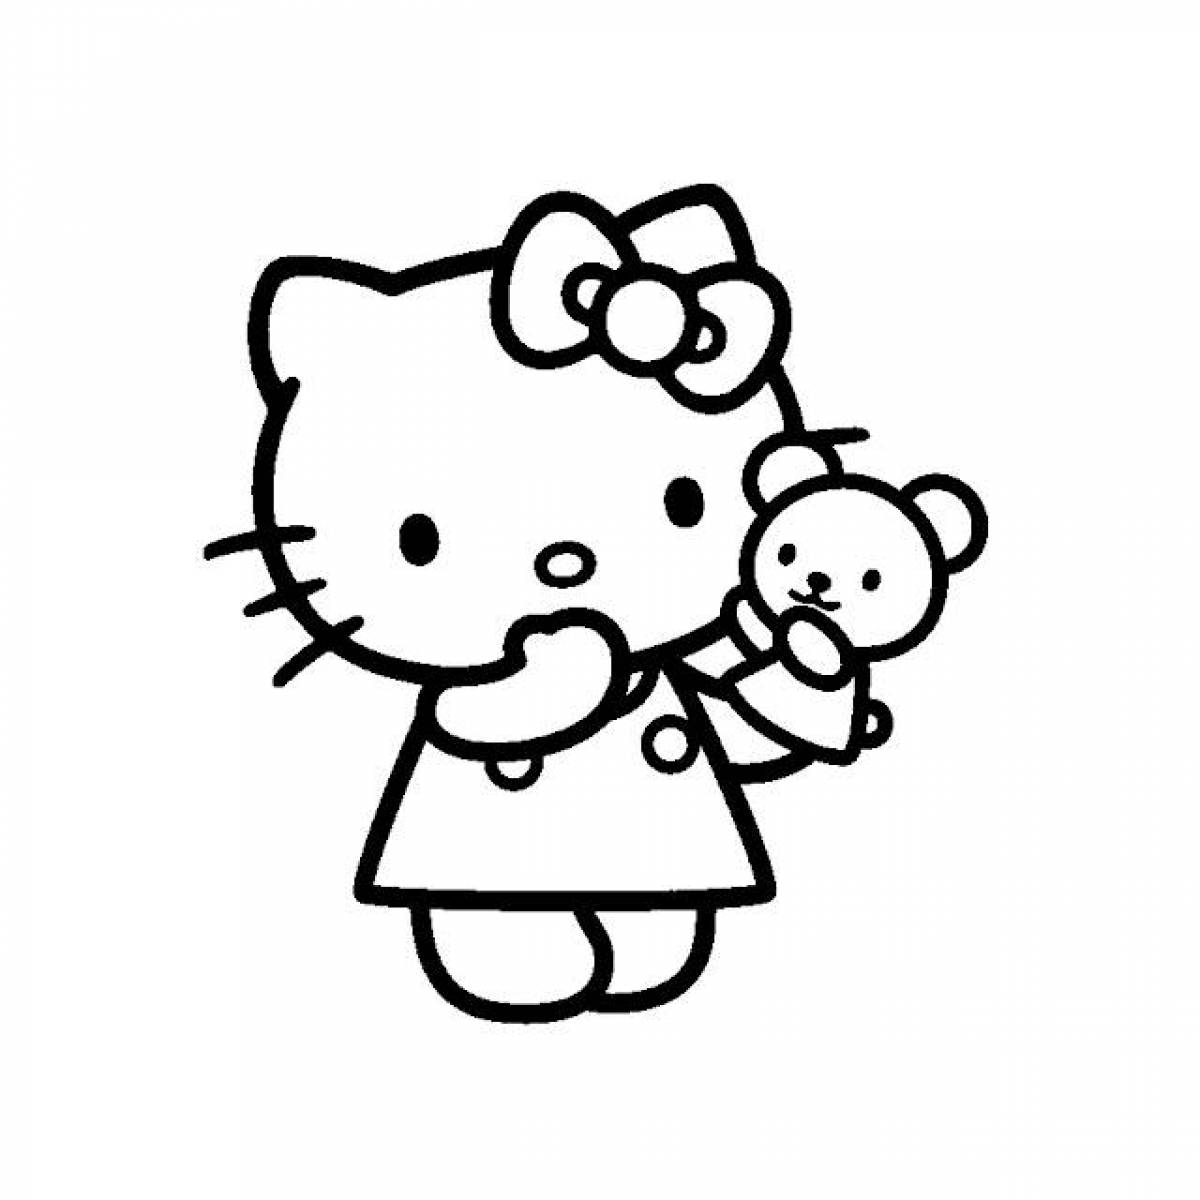 Coloring page of hello kitty melodies